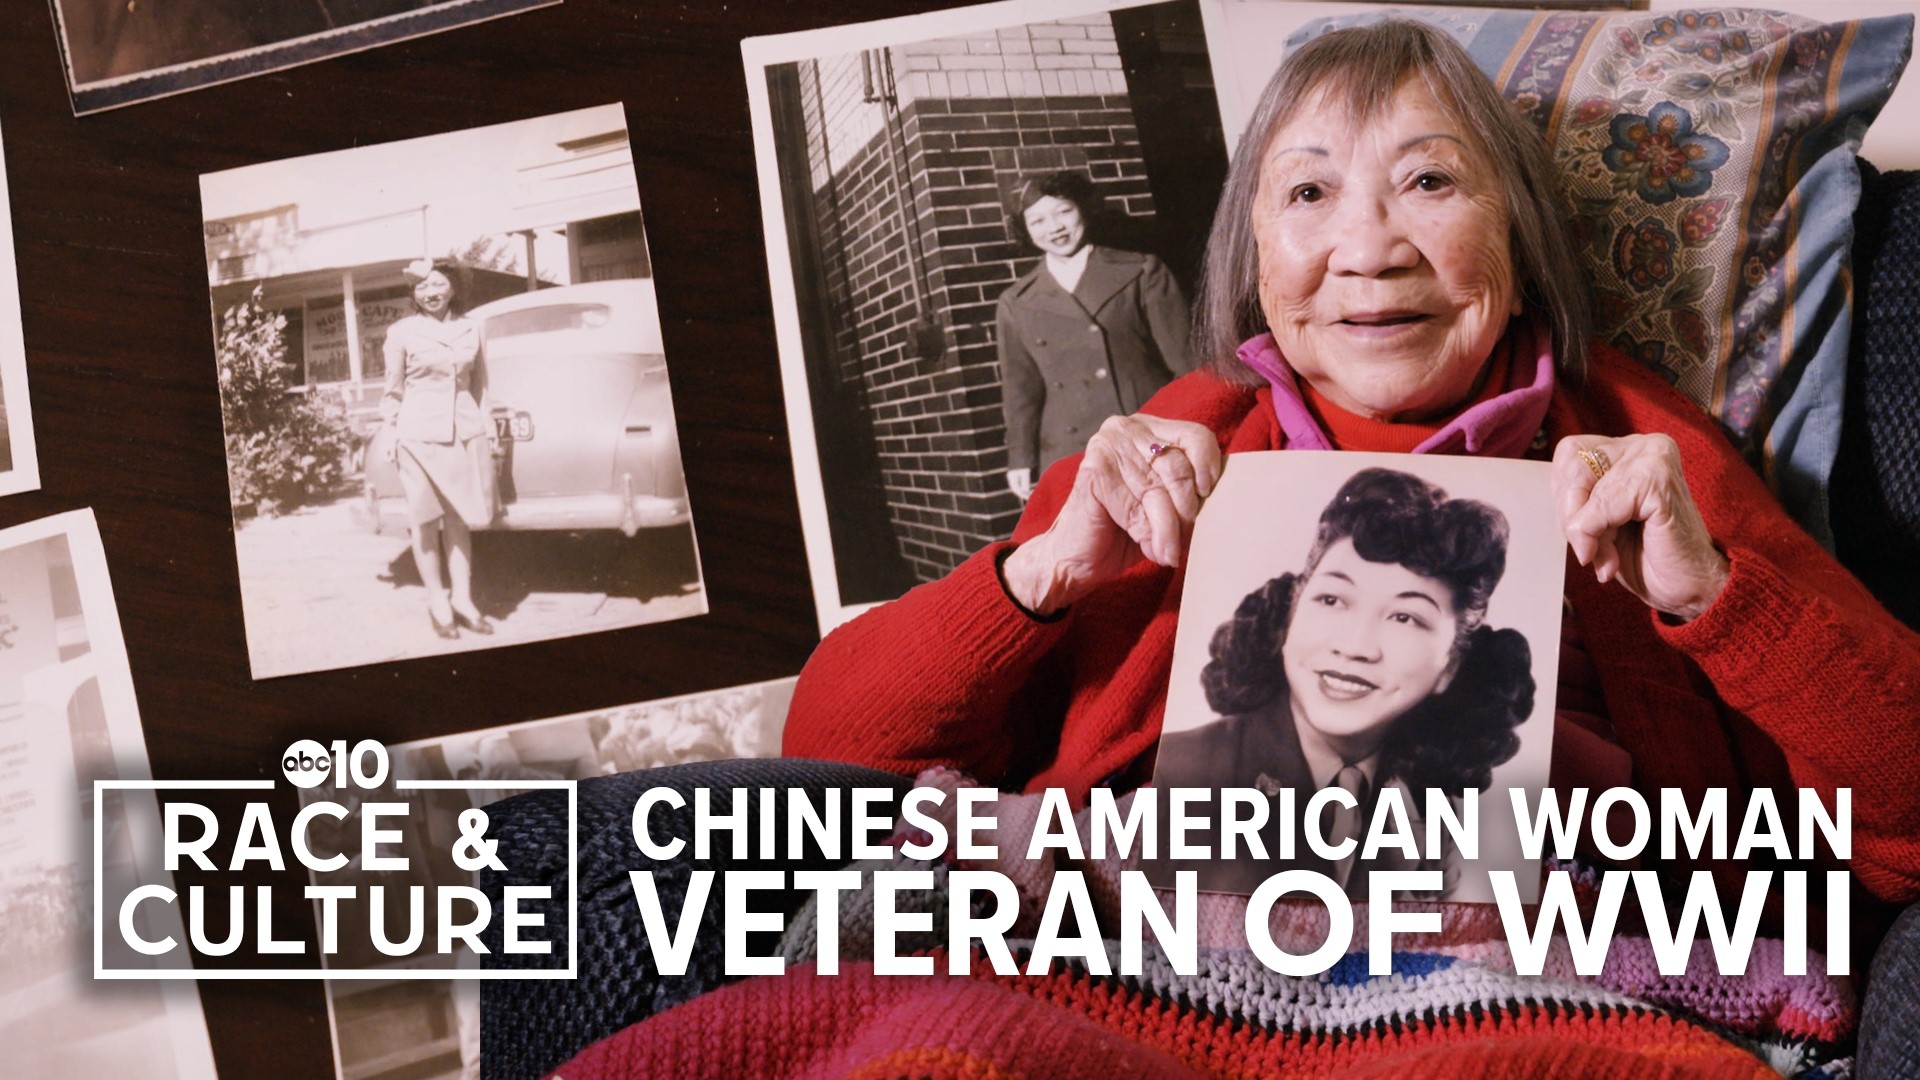 At over 100 years old, Ruth Chan Jang is one of the few surviving WWII veterans in the Sacramento area.